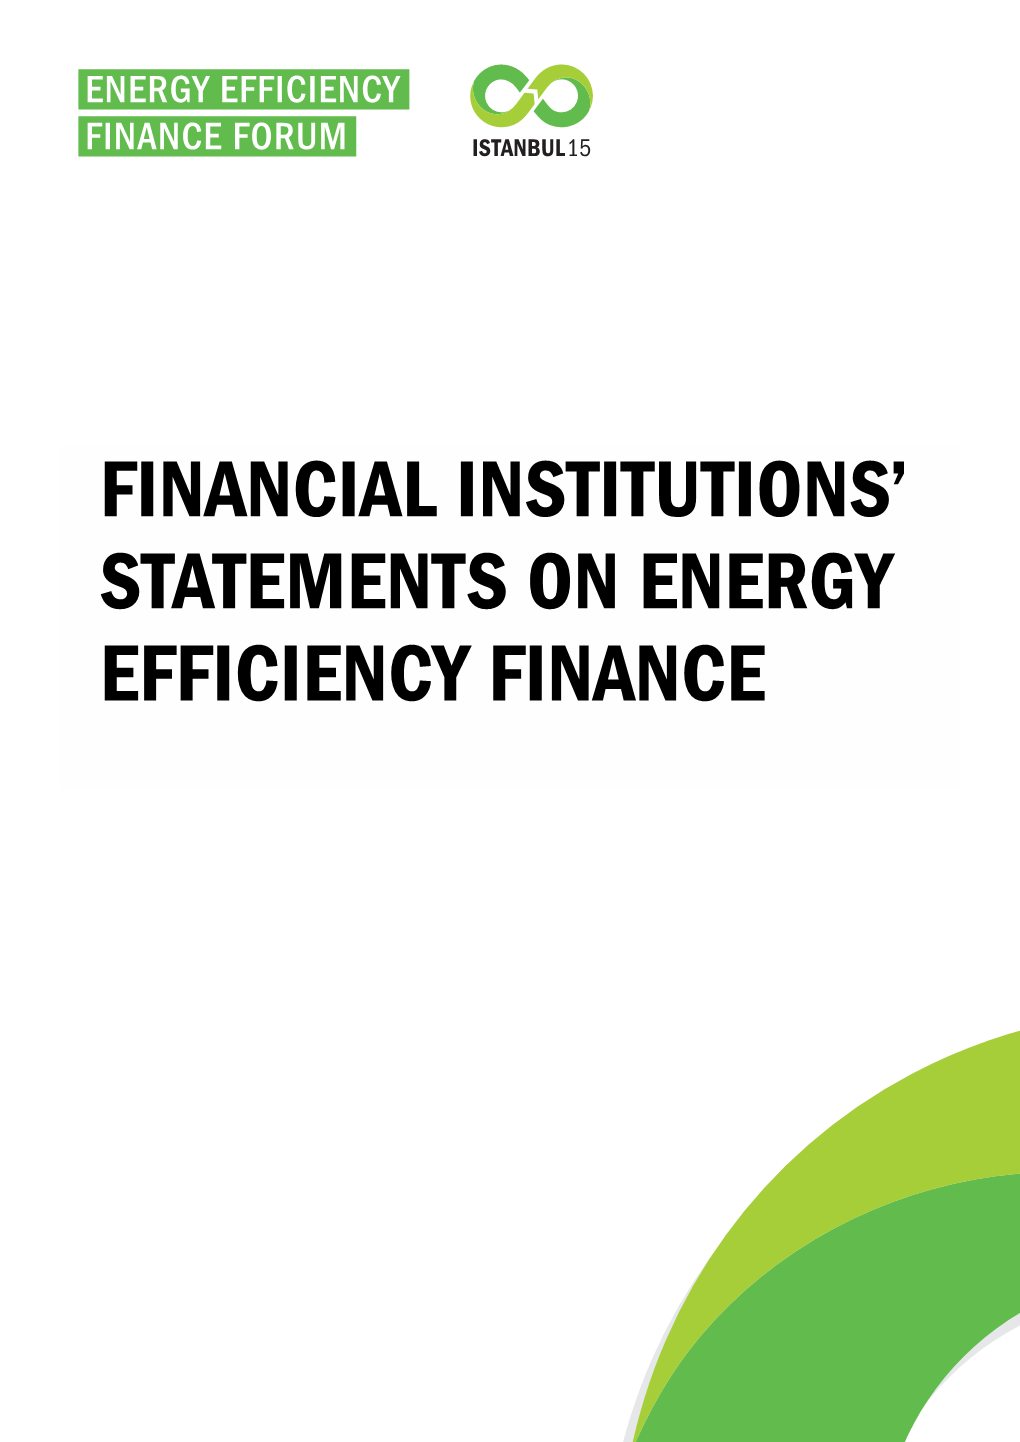 Financial Institutions' Statements on Energy